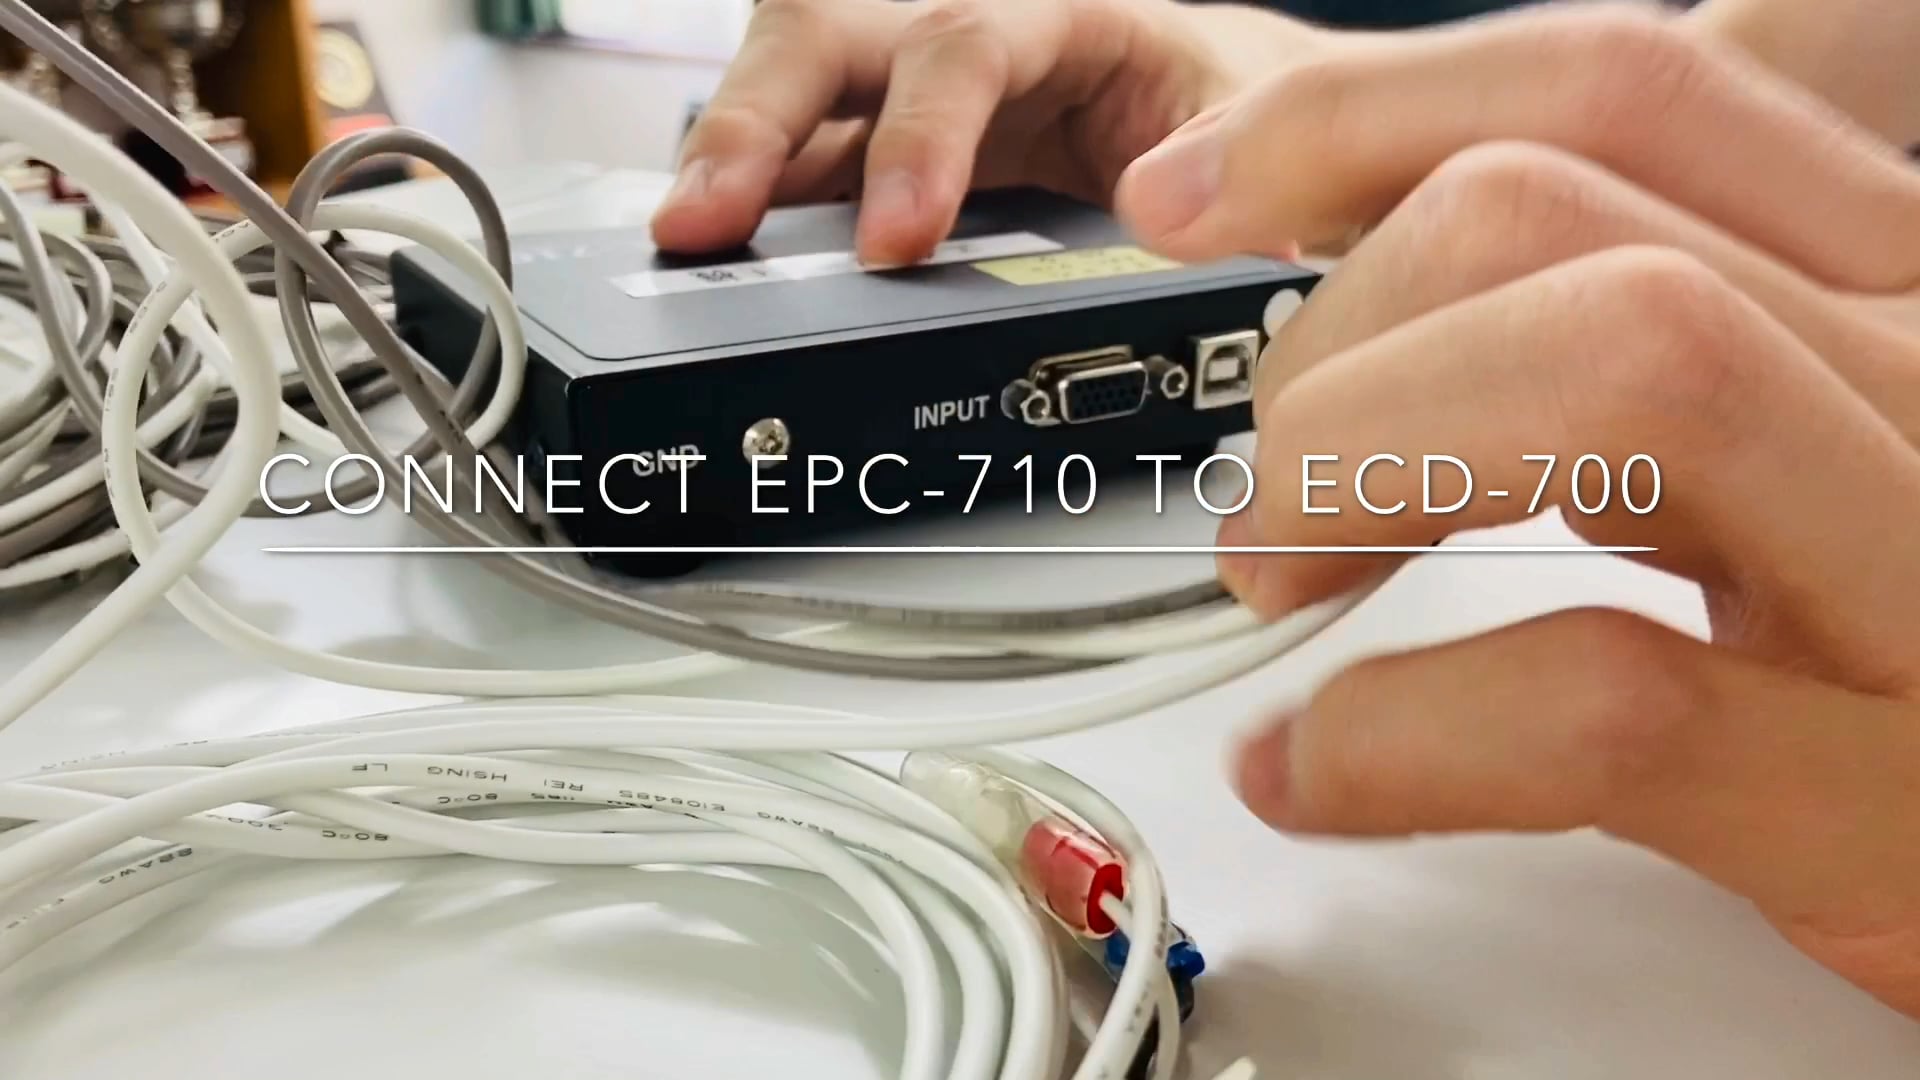 Connect EPC-710 to ECD-700